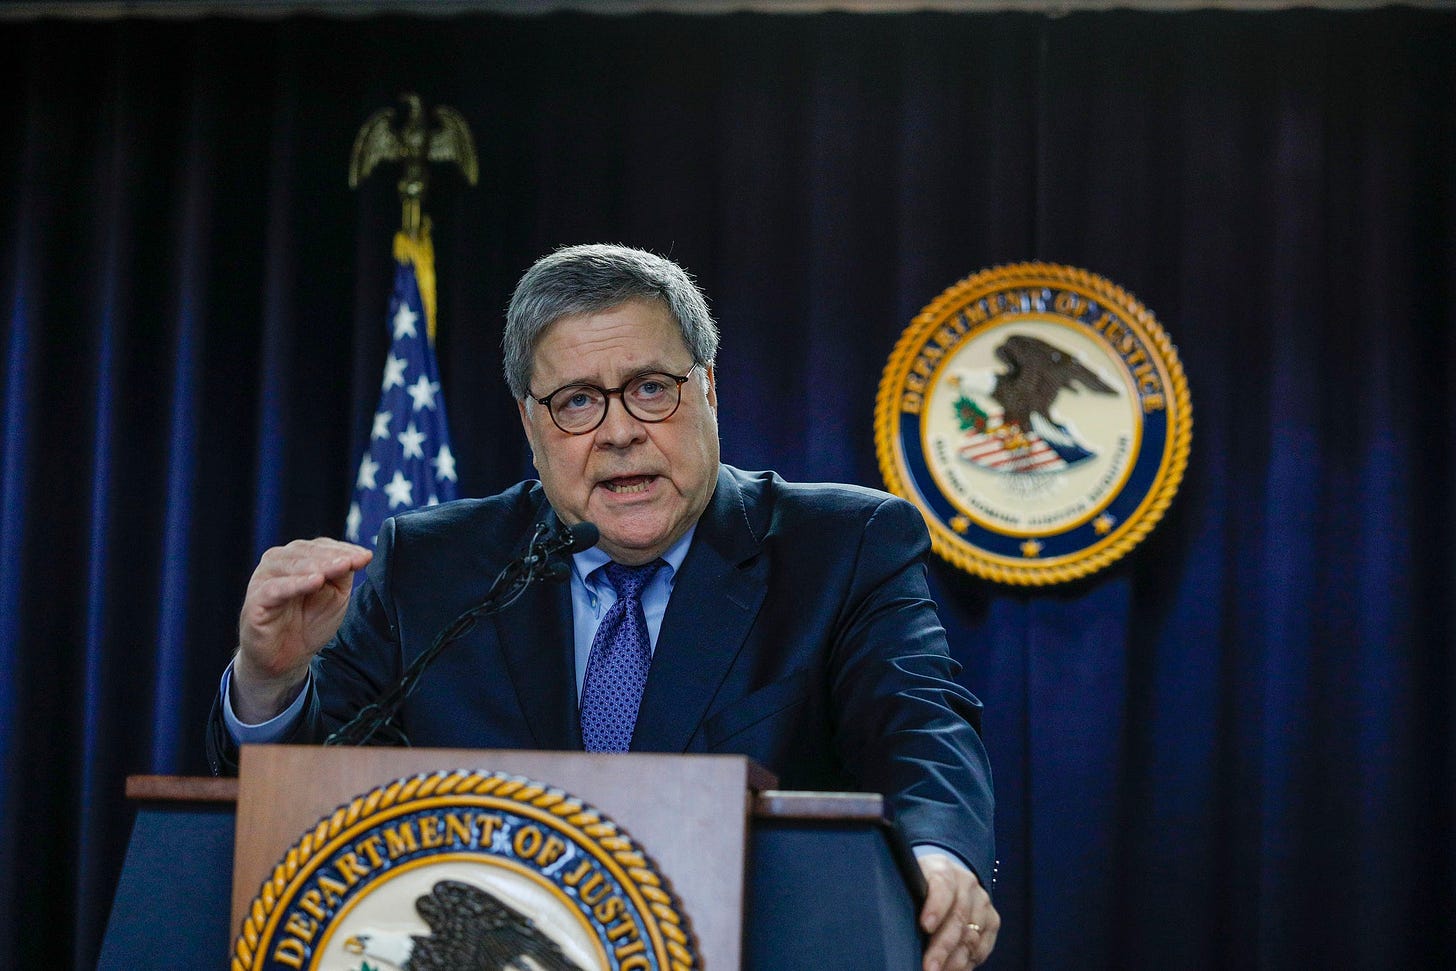 U.S. Attorney General William Barr announces a new Crime Reduction Initiative aimed at Detroit on December 18, 2019.